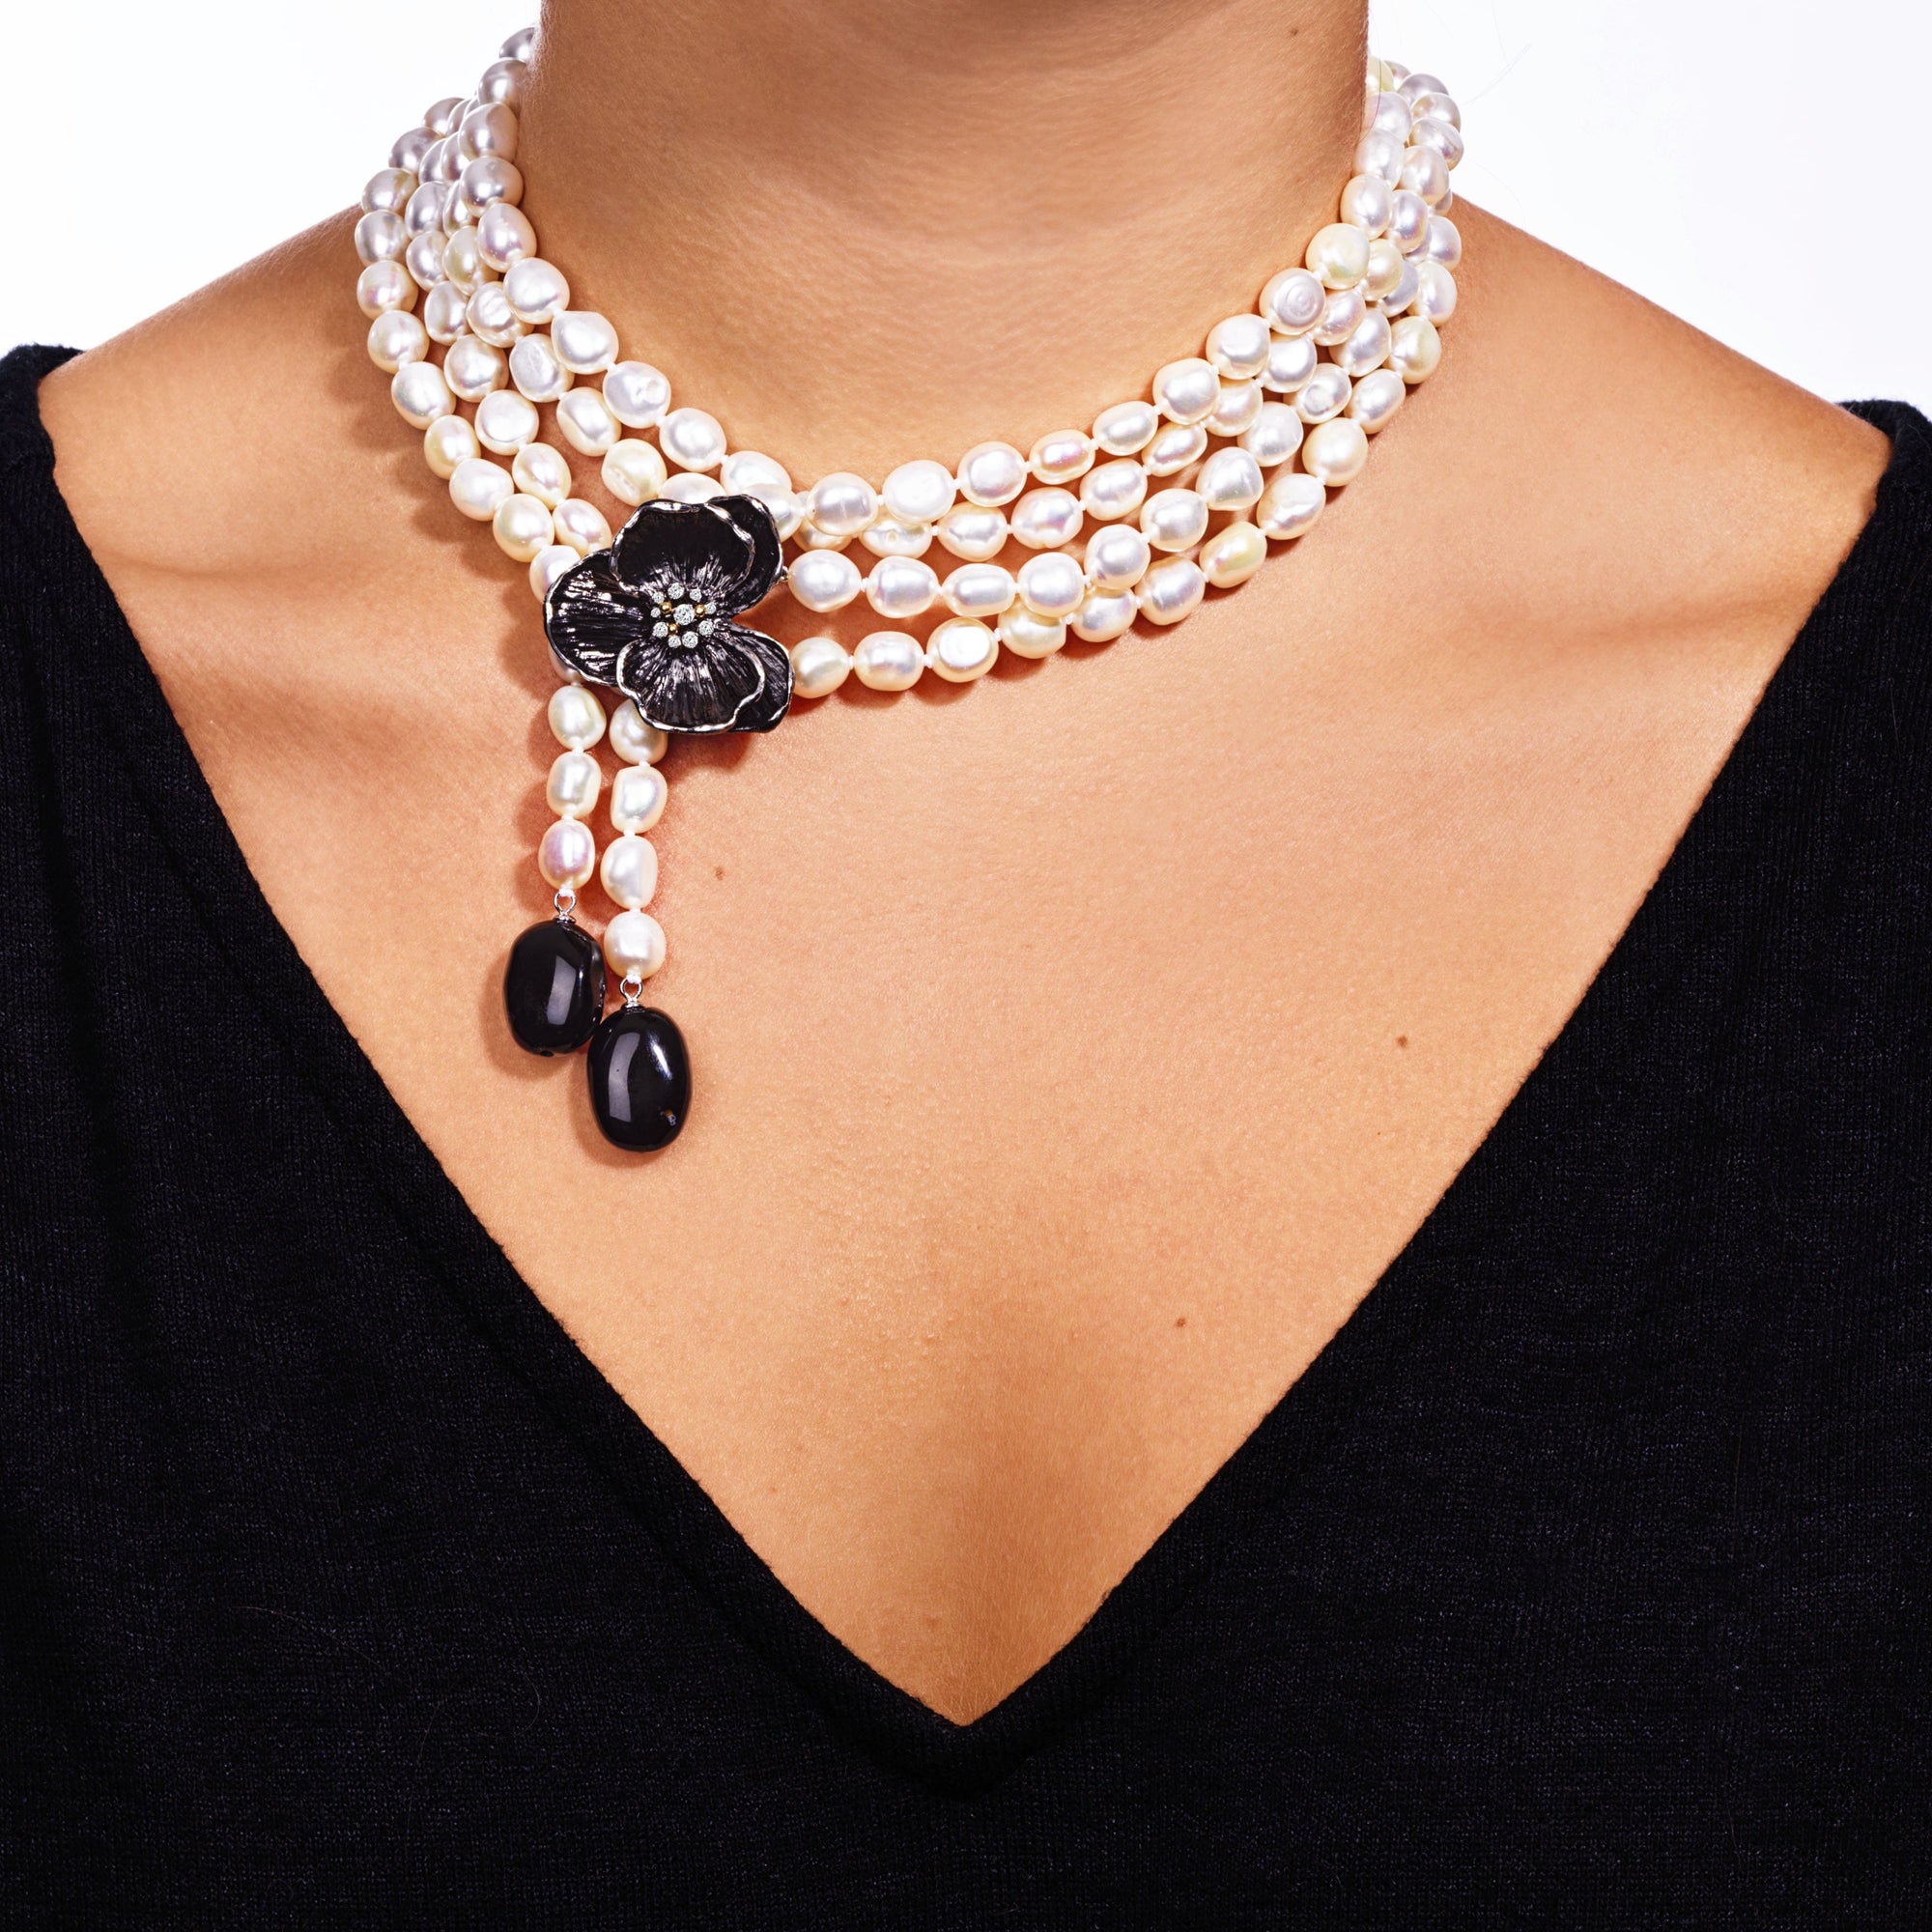 Michael Aram Orchid Lariat Necklace with Pearls, Black Onyx and Diamonds